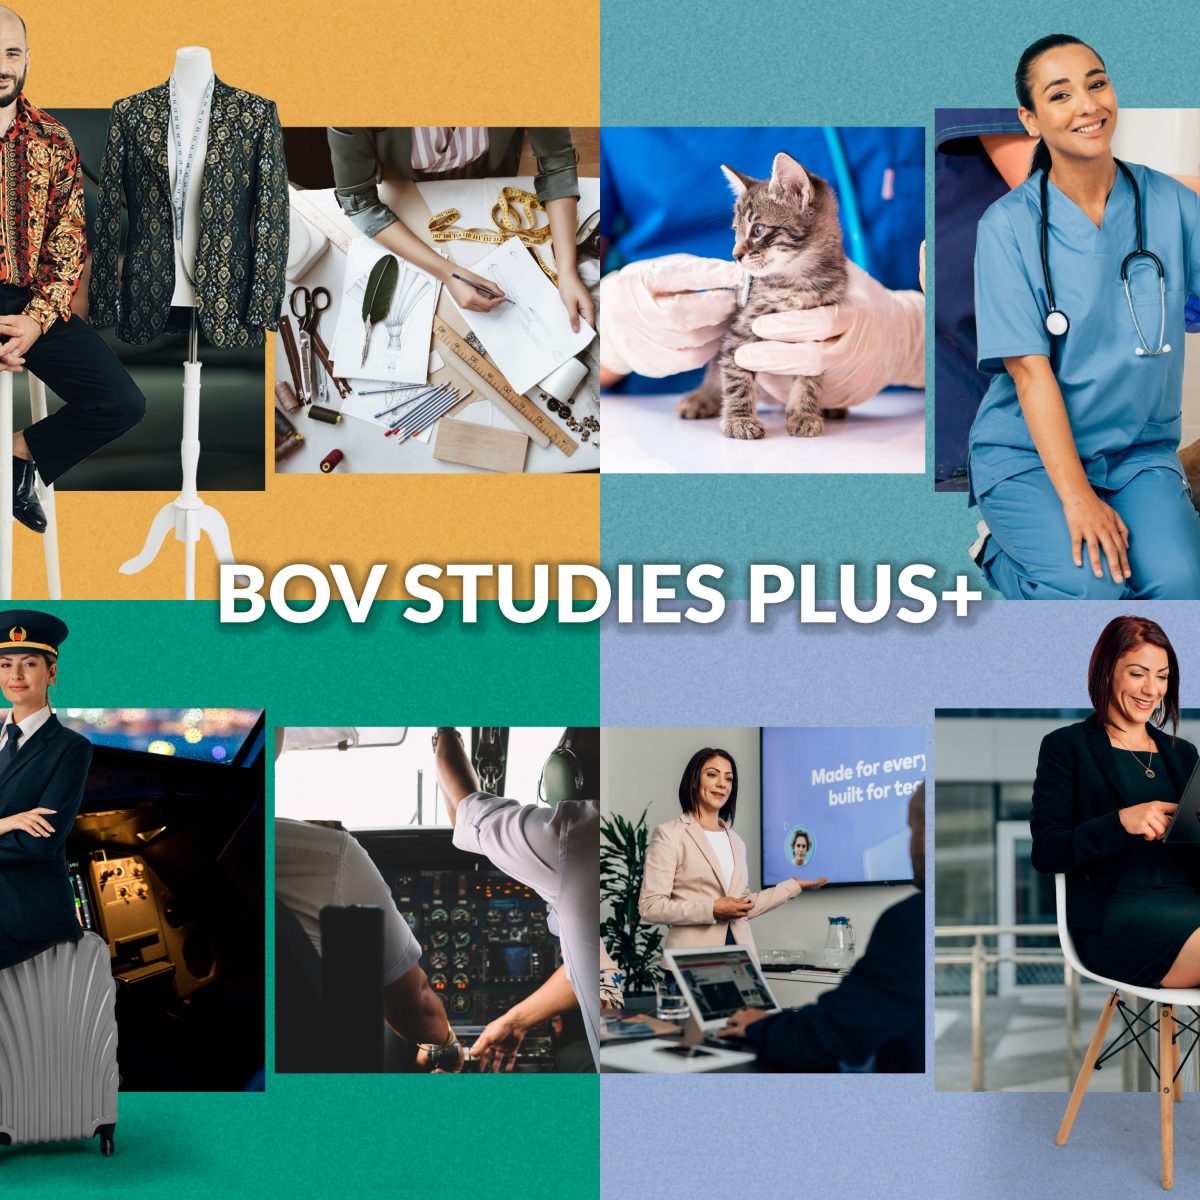 Affordable financing to students through The BOV Studies Plus+